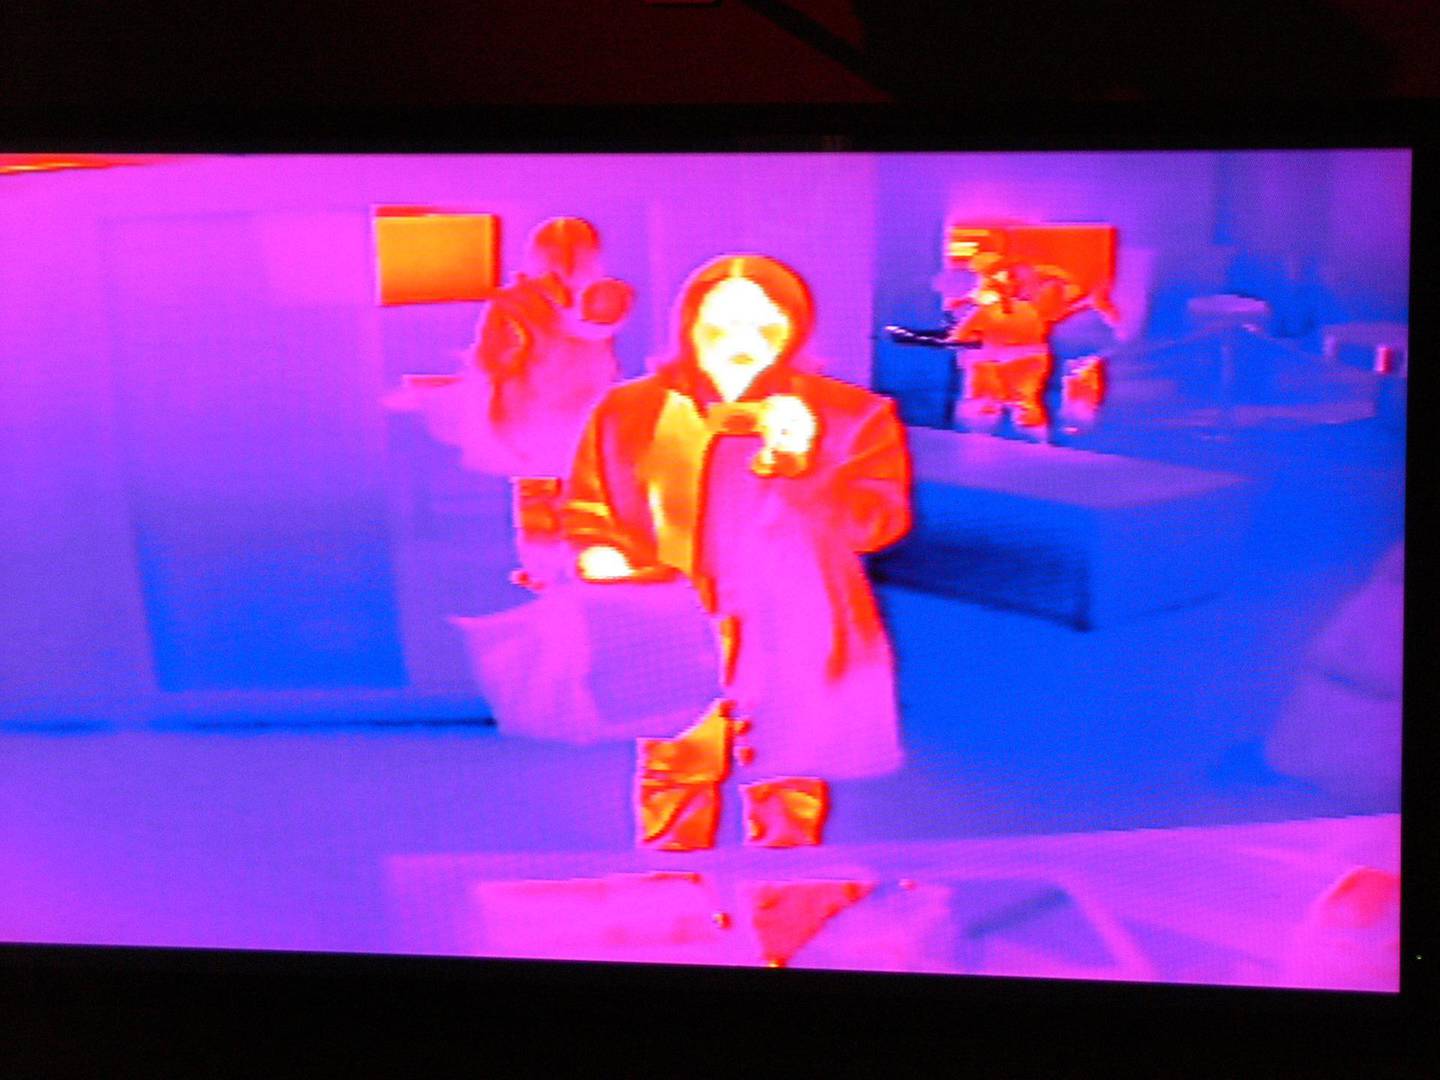 Thermal imaging sensors are being used at Abu Dhabi International Airport to scan transit and arriving passengers. Courtesy flickr / Heather Cowper